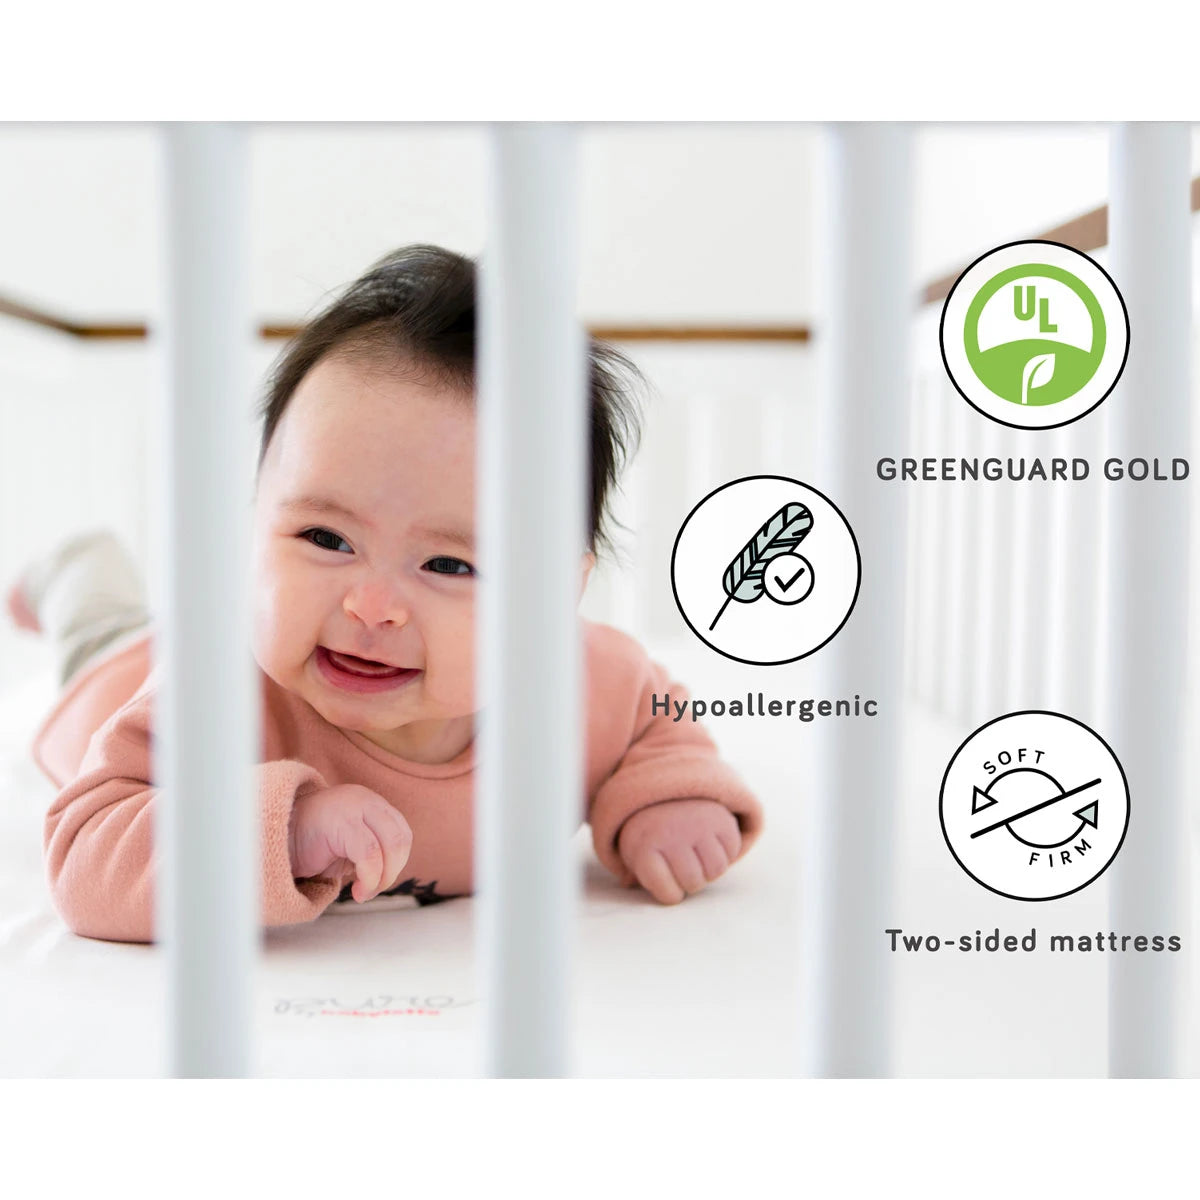 Babyletto Pure Core Non-Toxic Crib Mattress with Dry Waterproof Cover Features